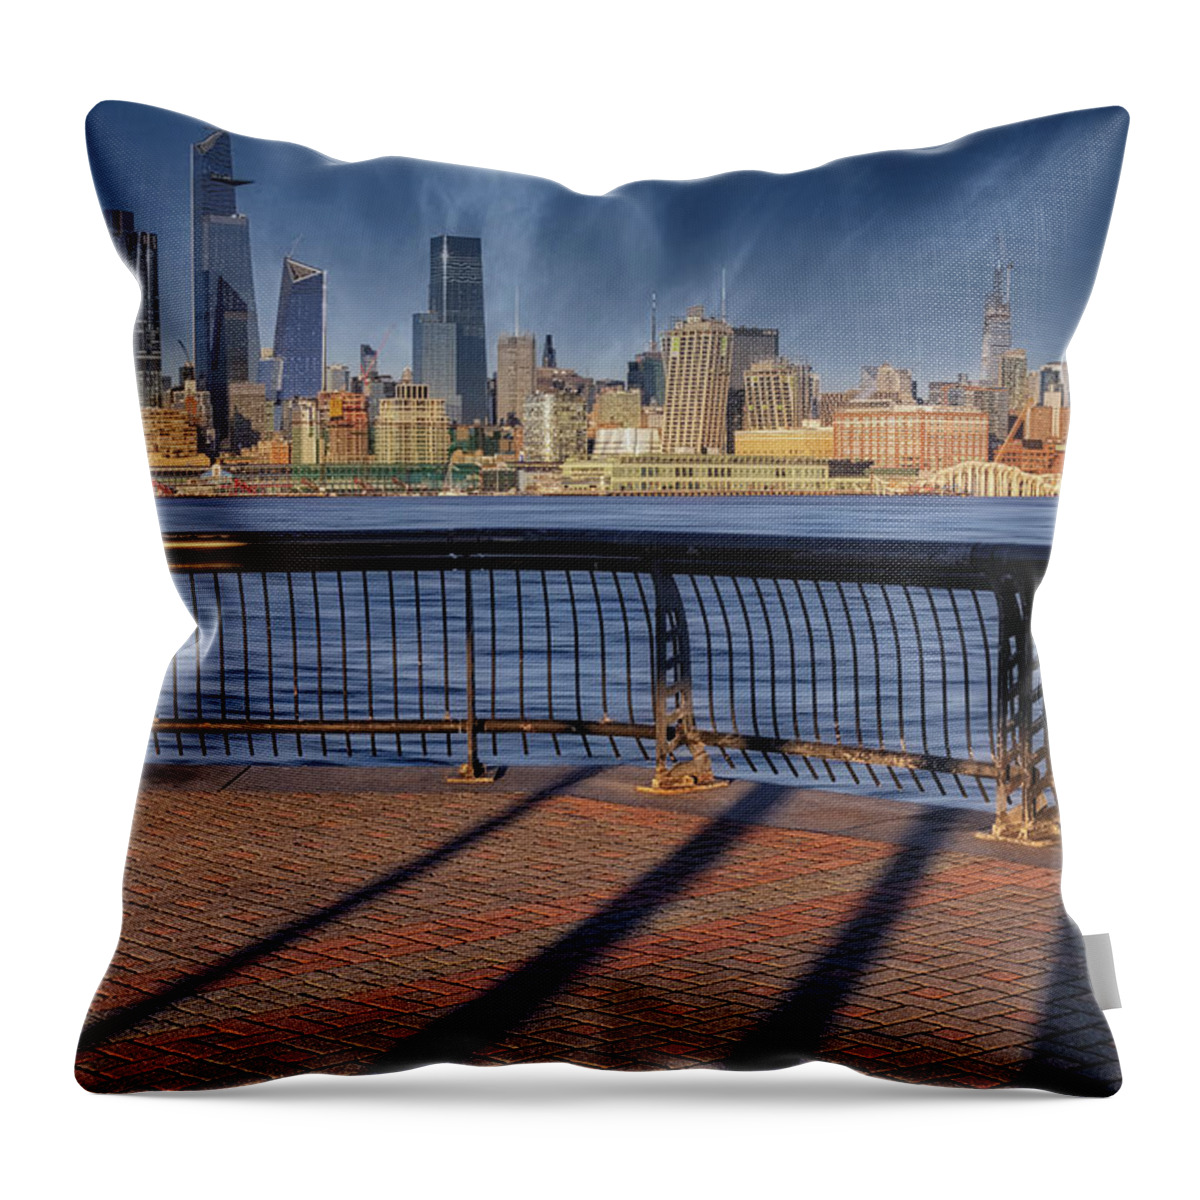 Nyc Skyline Throw Pillow featuring the photograph NYC Empire State Hudson Yards by Susan Candelario